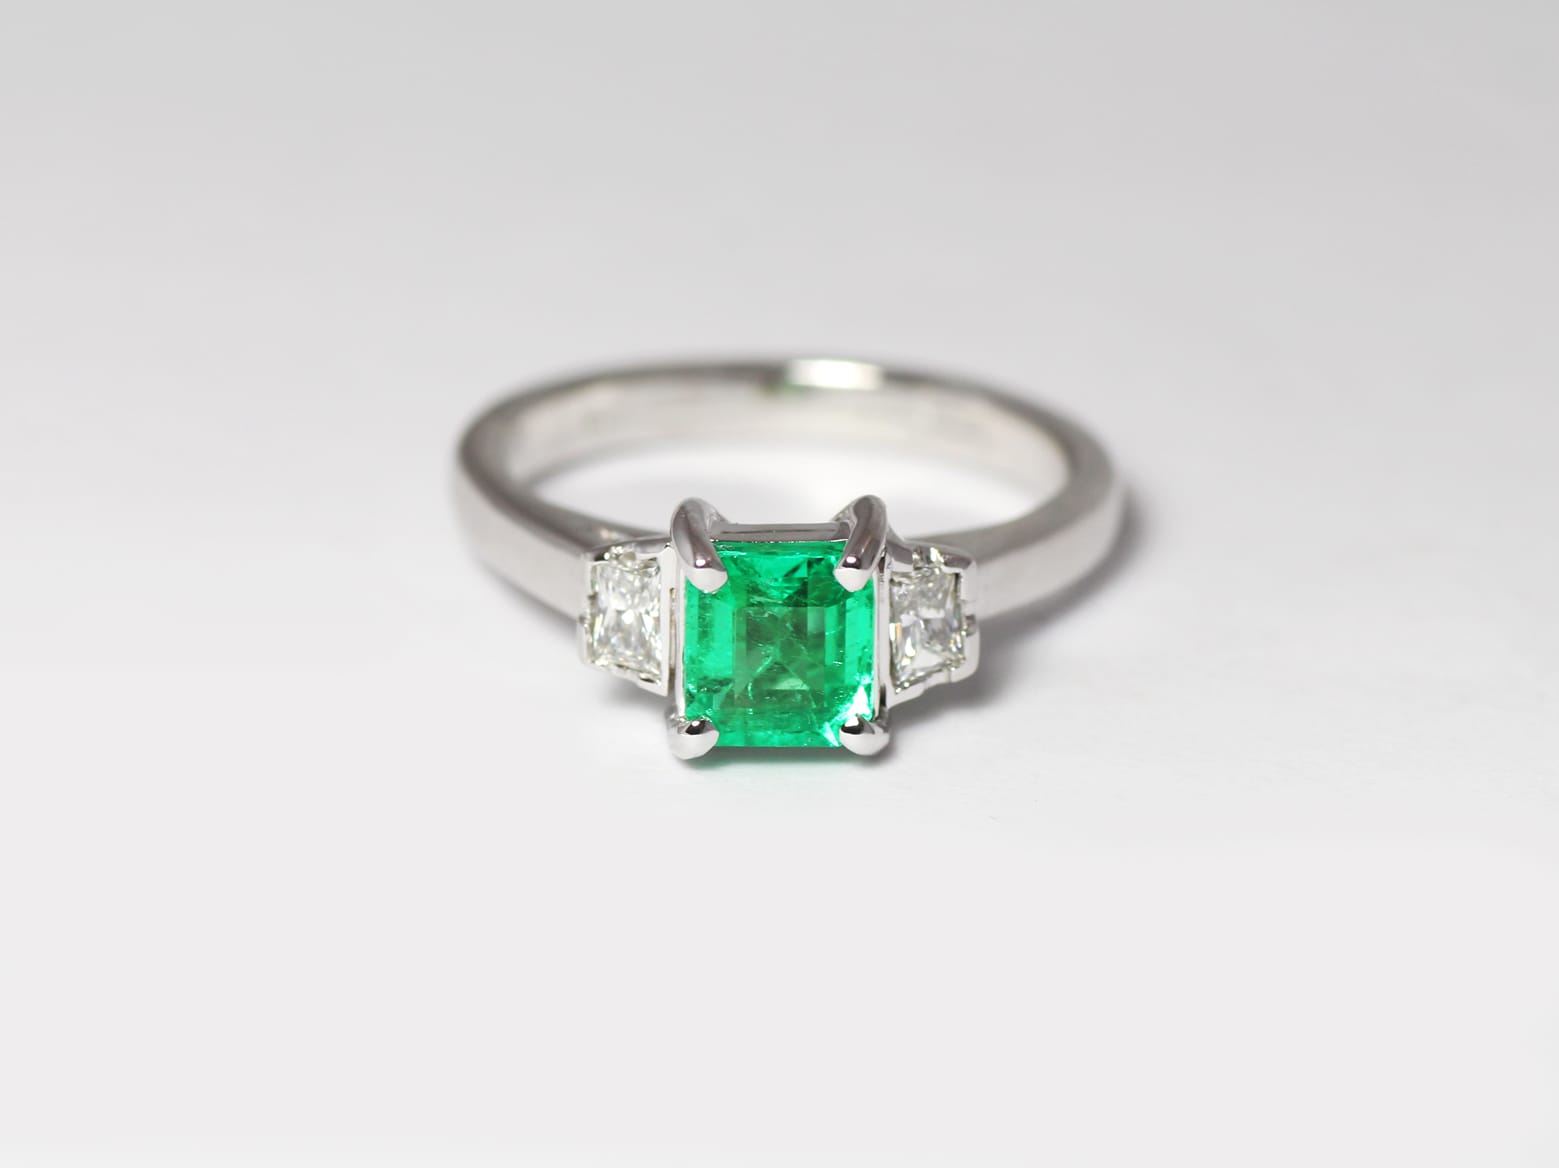 18ct Fairtrade white gold with emerald and side diamonds Zoe Pook Jewellery